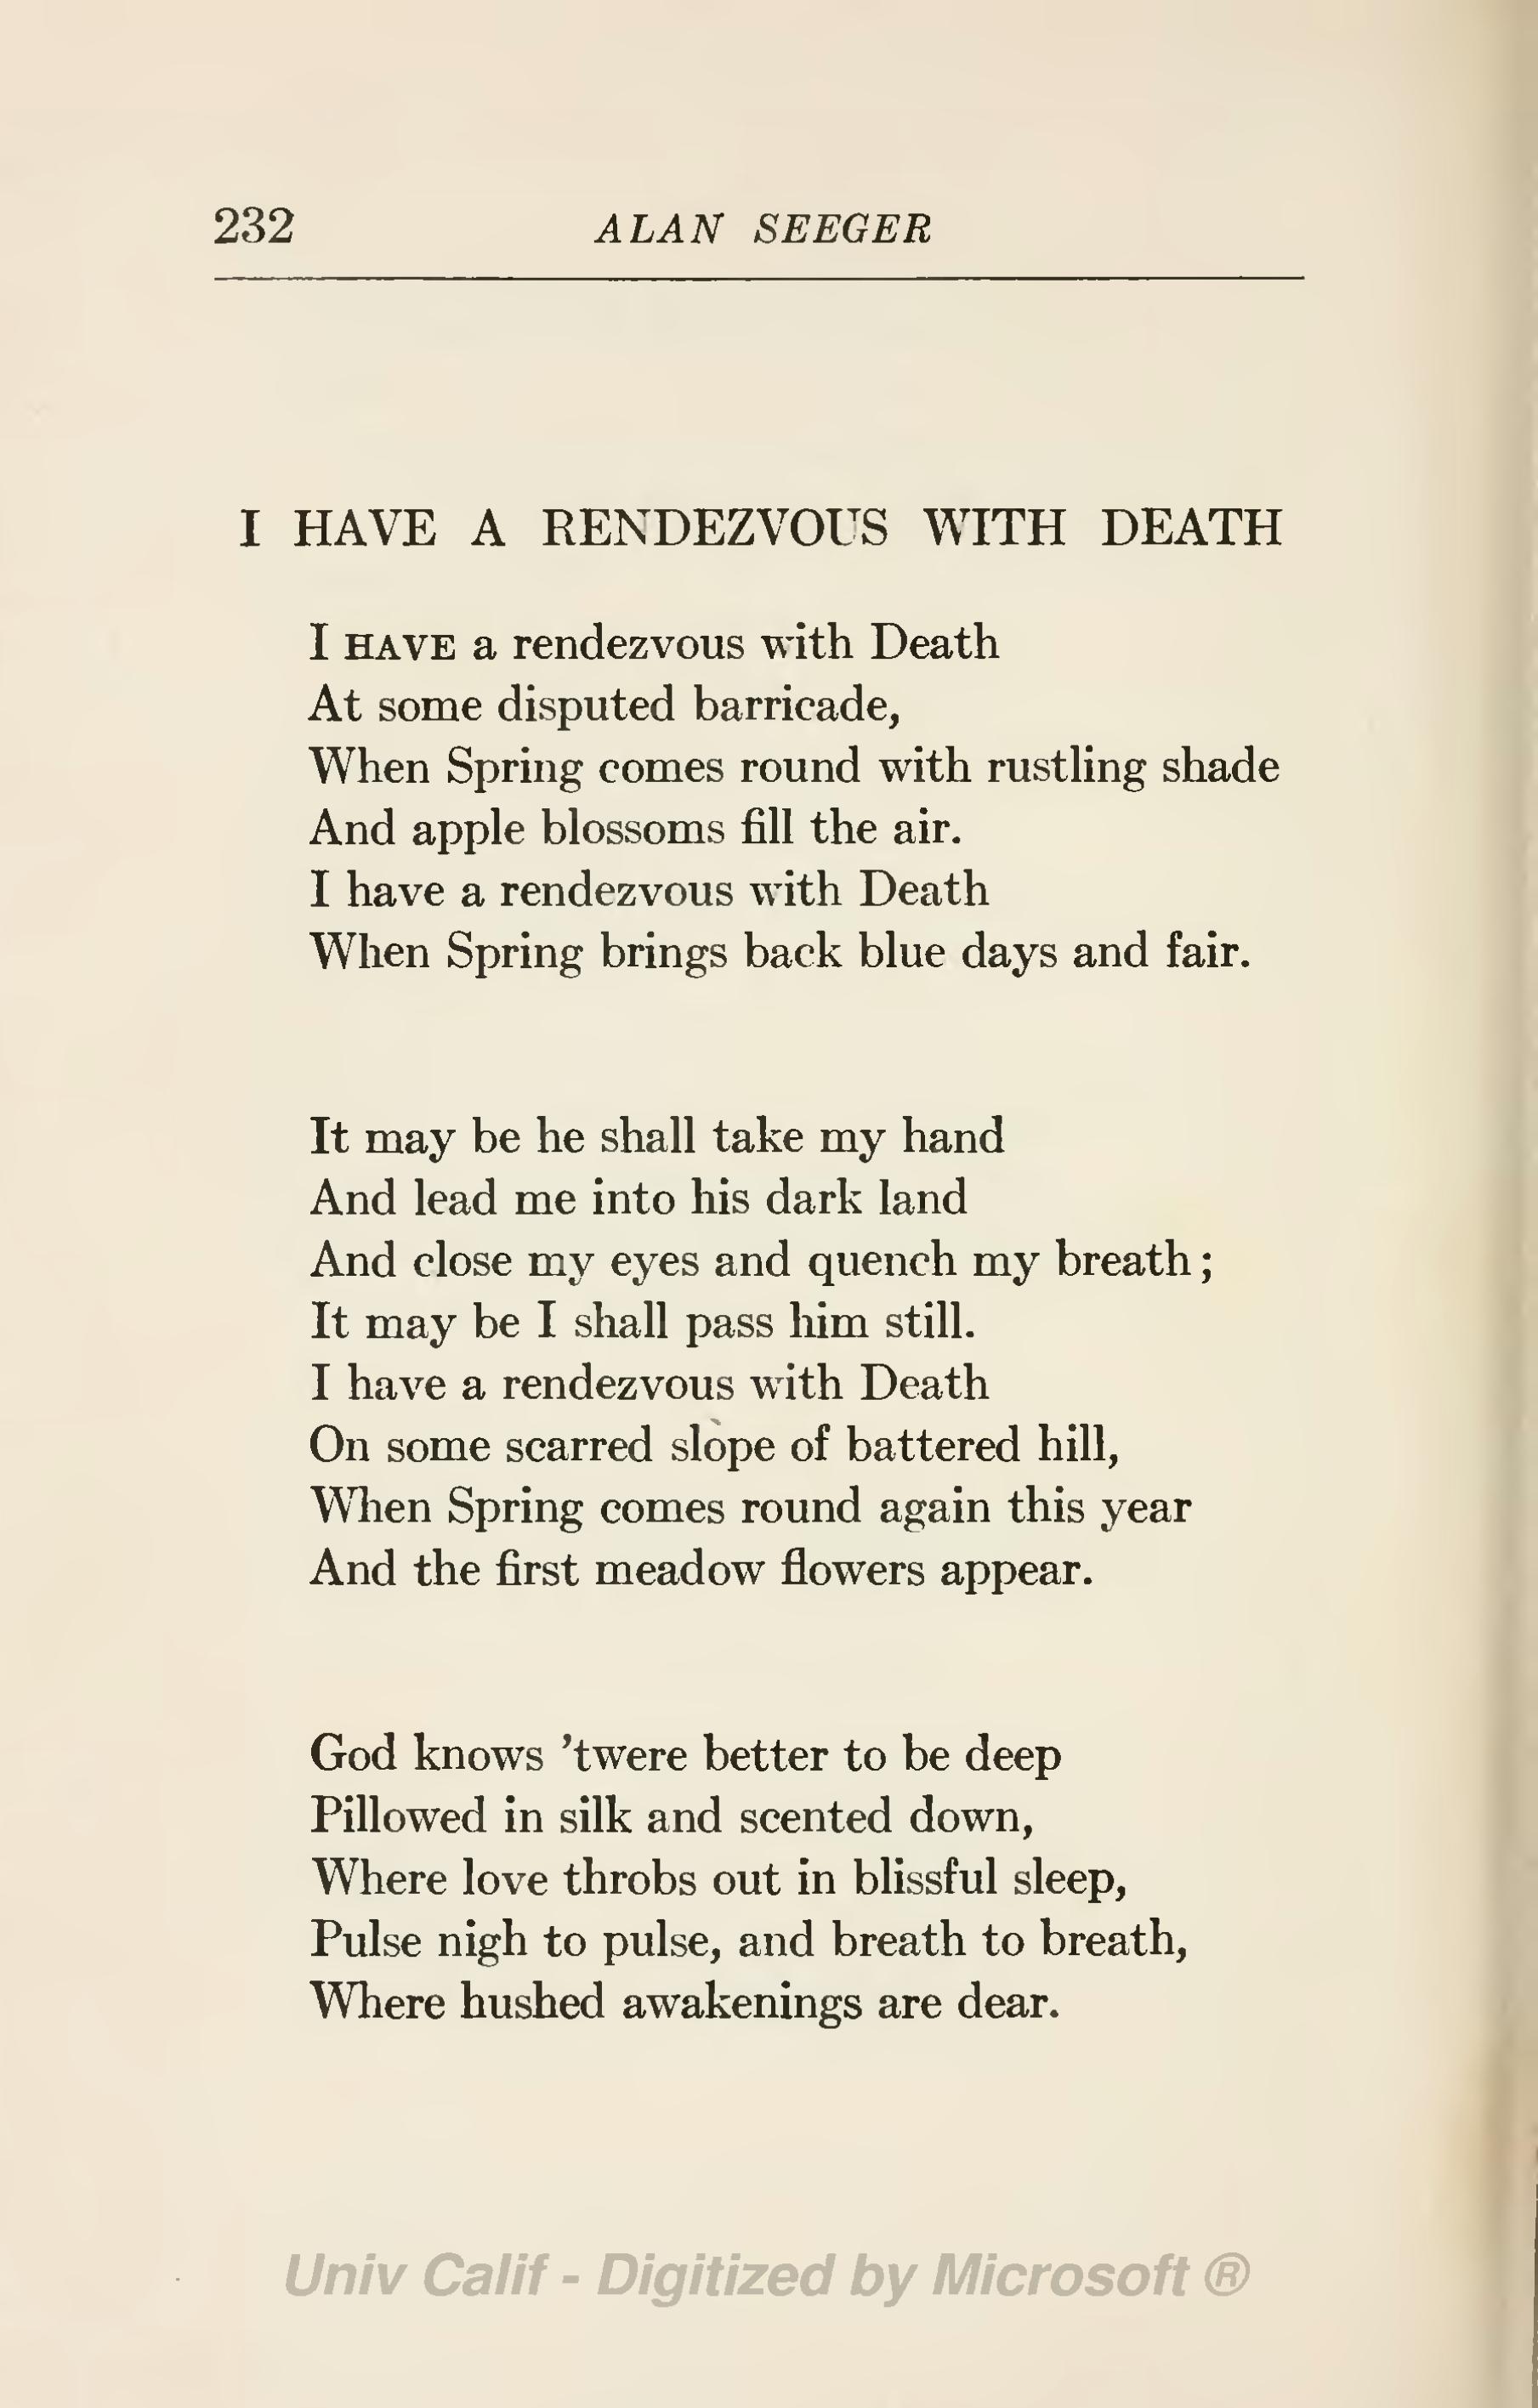 rendezvous with death poem